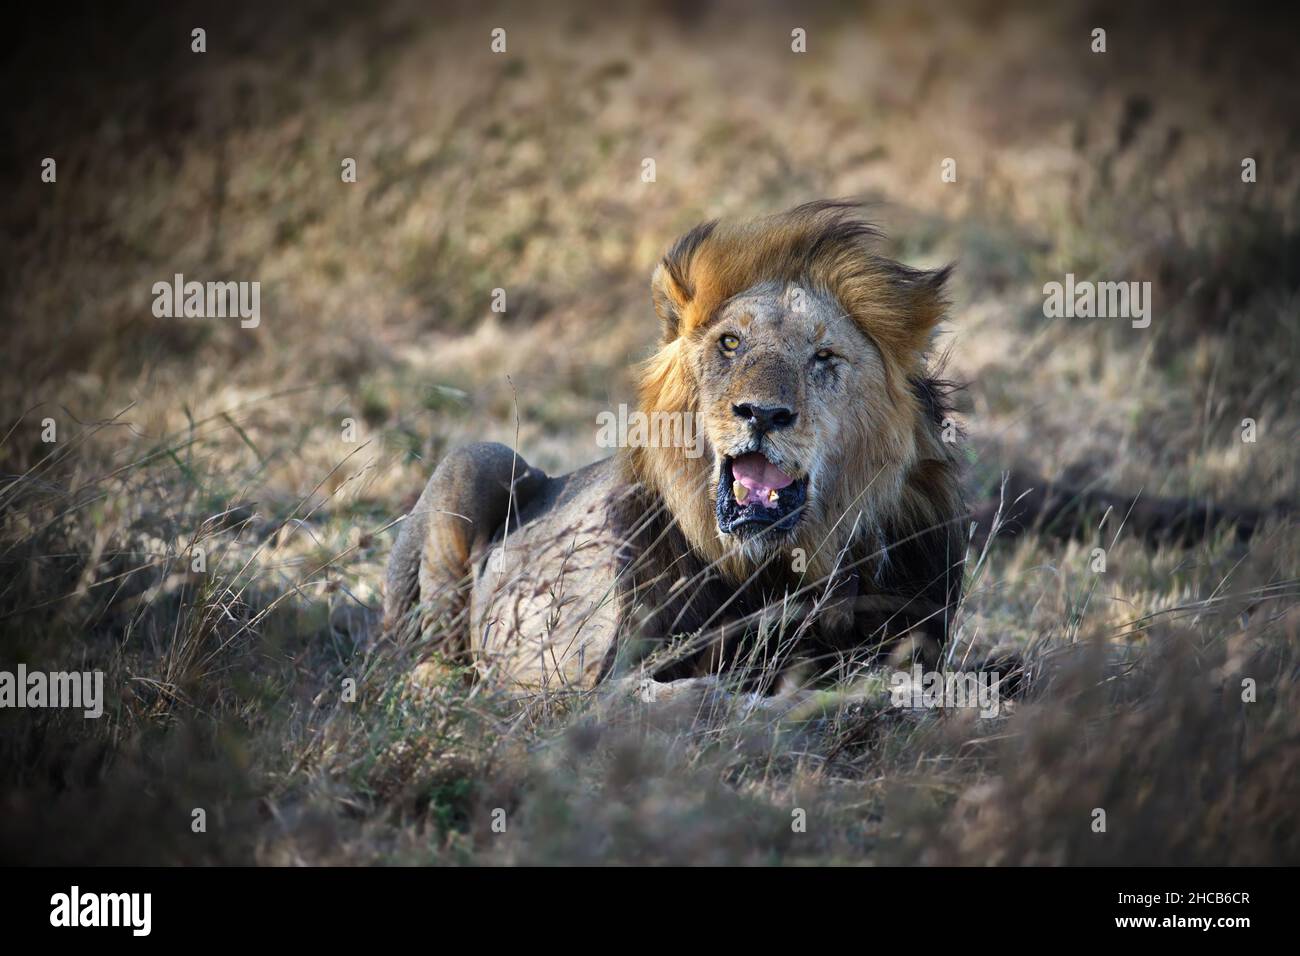 Lion in Tanzania nature during daylight Stock Photo